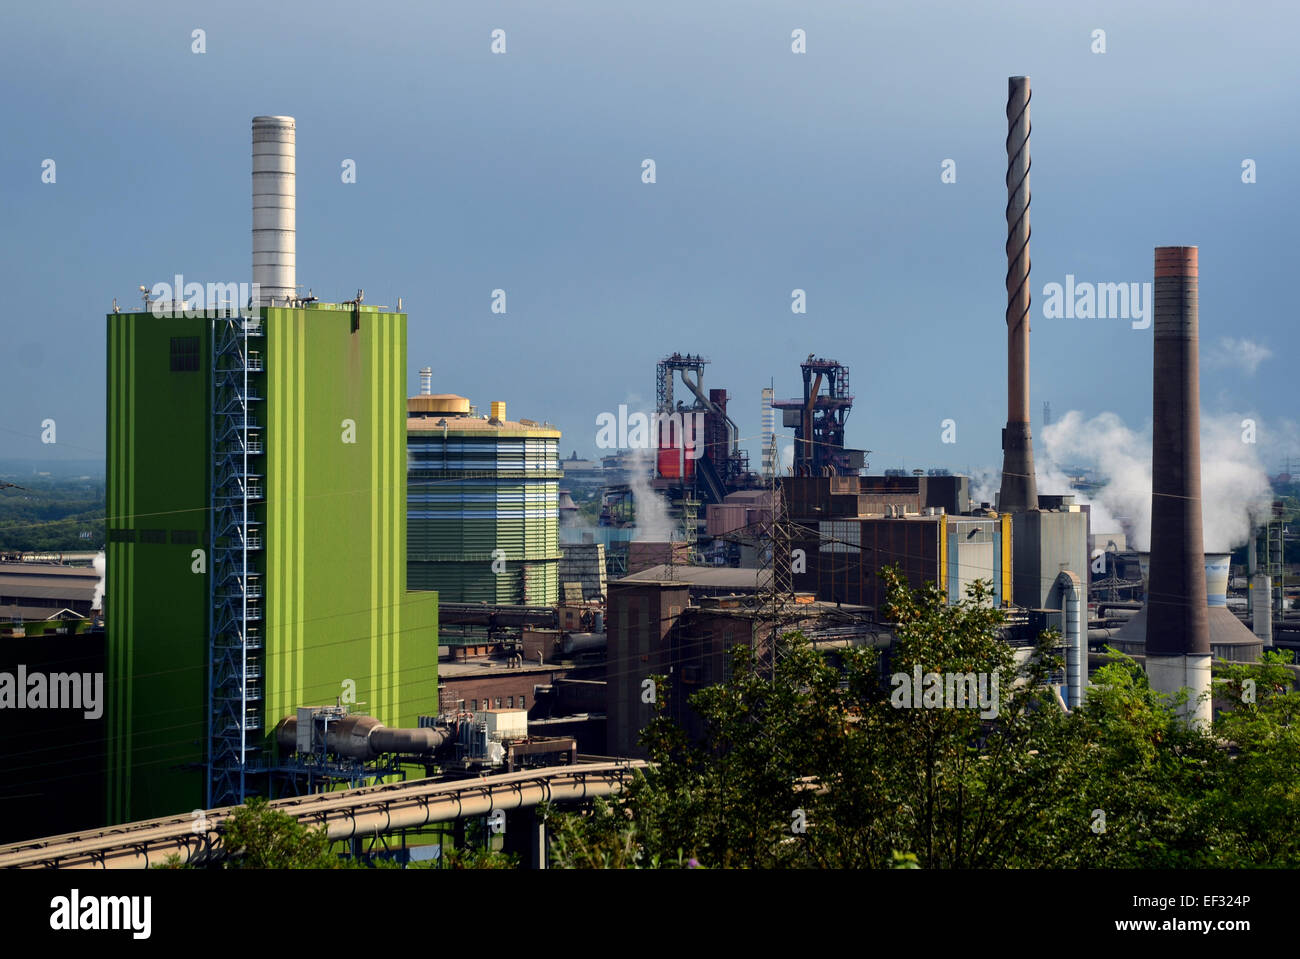 View from Alsumer Berg lookout, a 70m high dump, on the gas heating plant Hamborn (L) and the ThyssenKrupp steelworks with the furnaces in Duisburg-Bruckhausen, North Rhine-Westphalia. Photo from 31st August 2014. Stock Photo